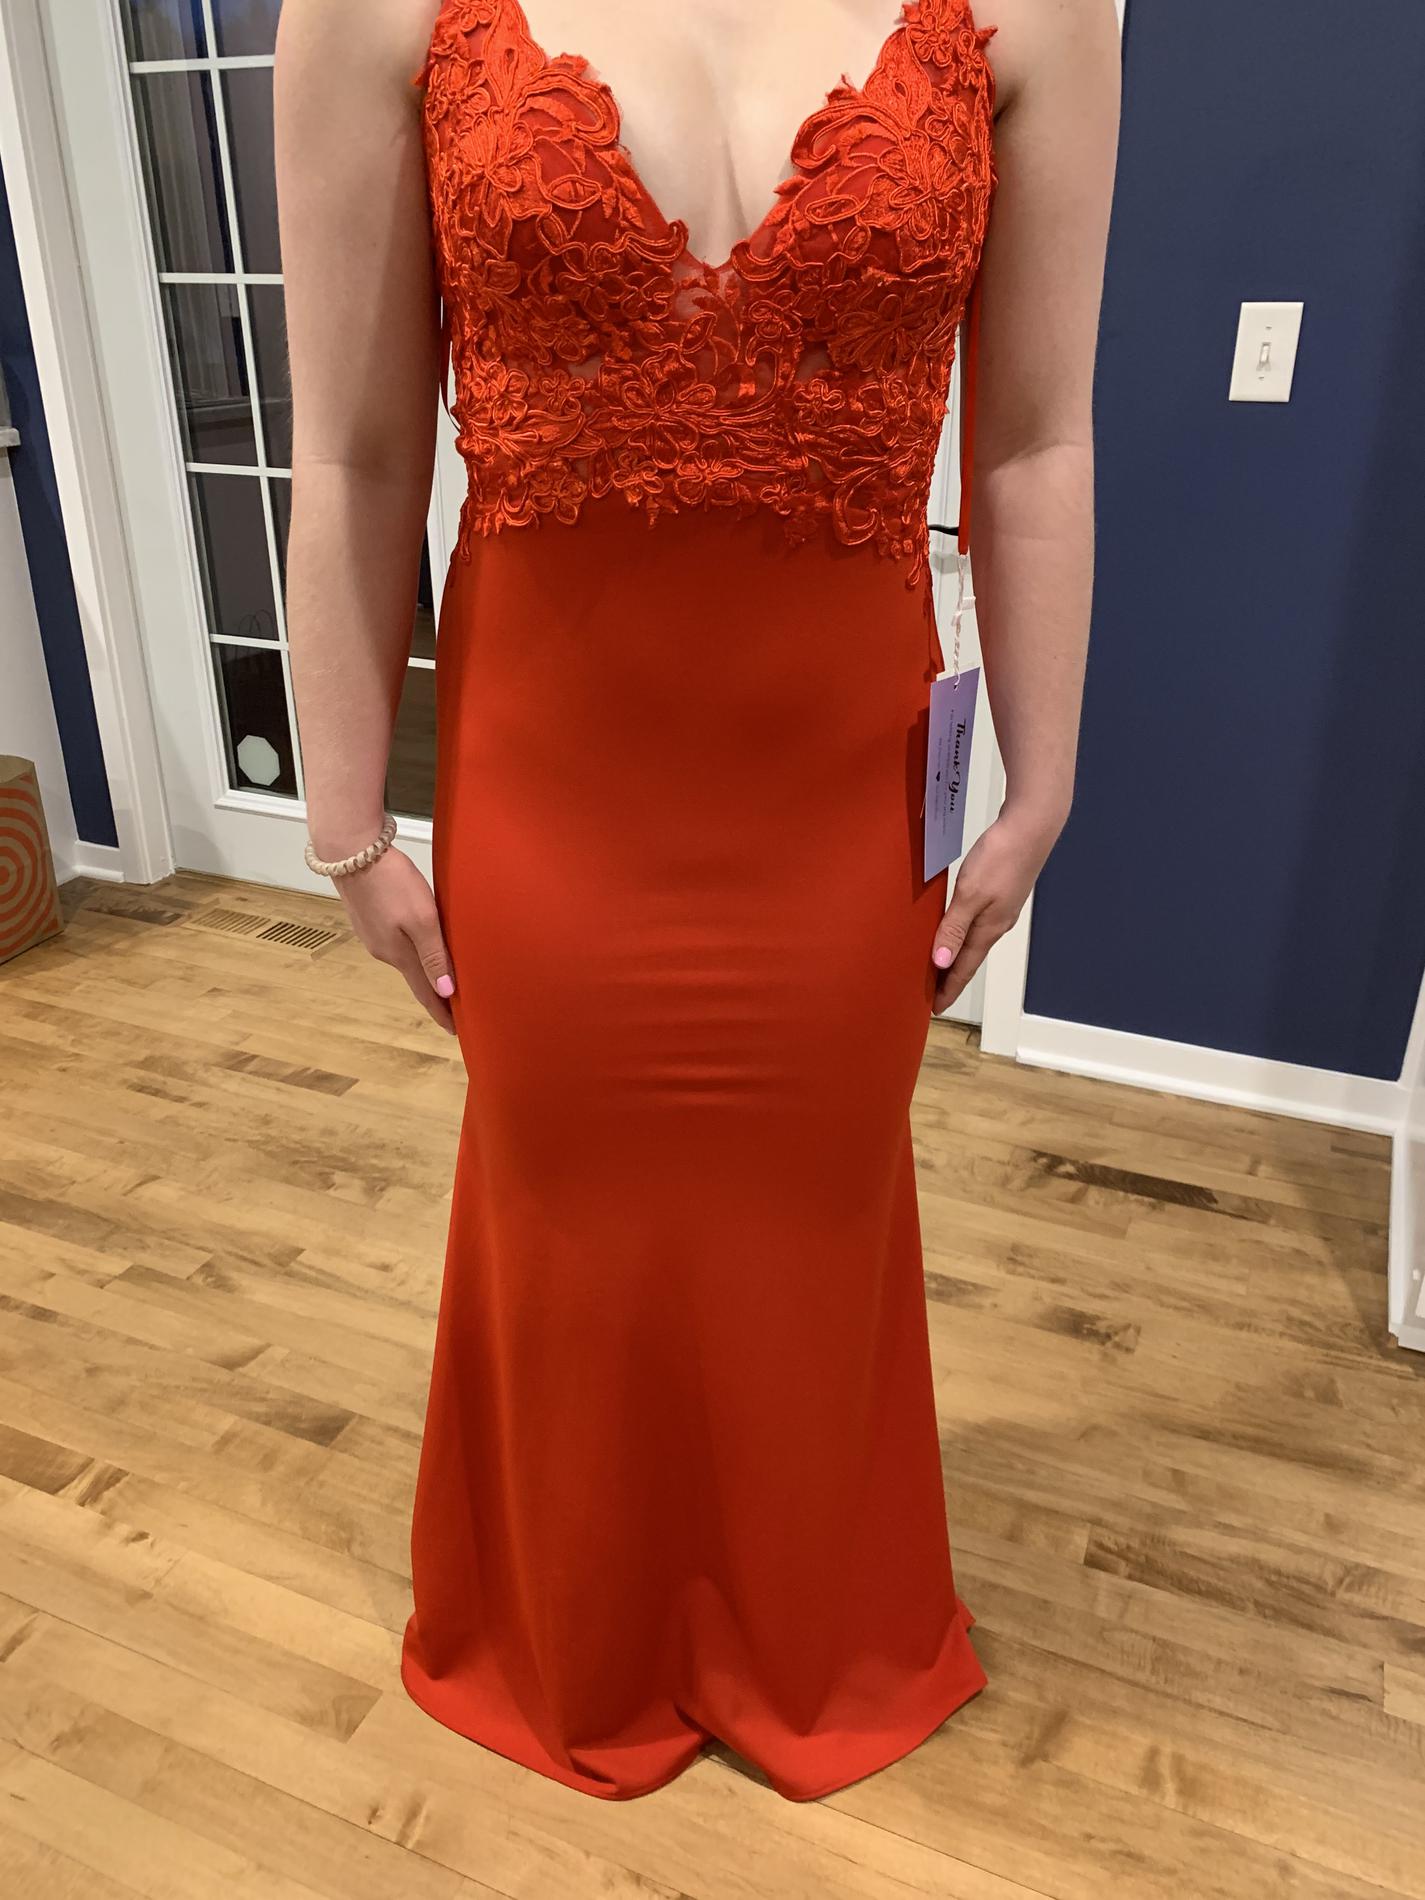 Size 4 Red Mermaid Dress on Queenly